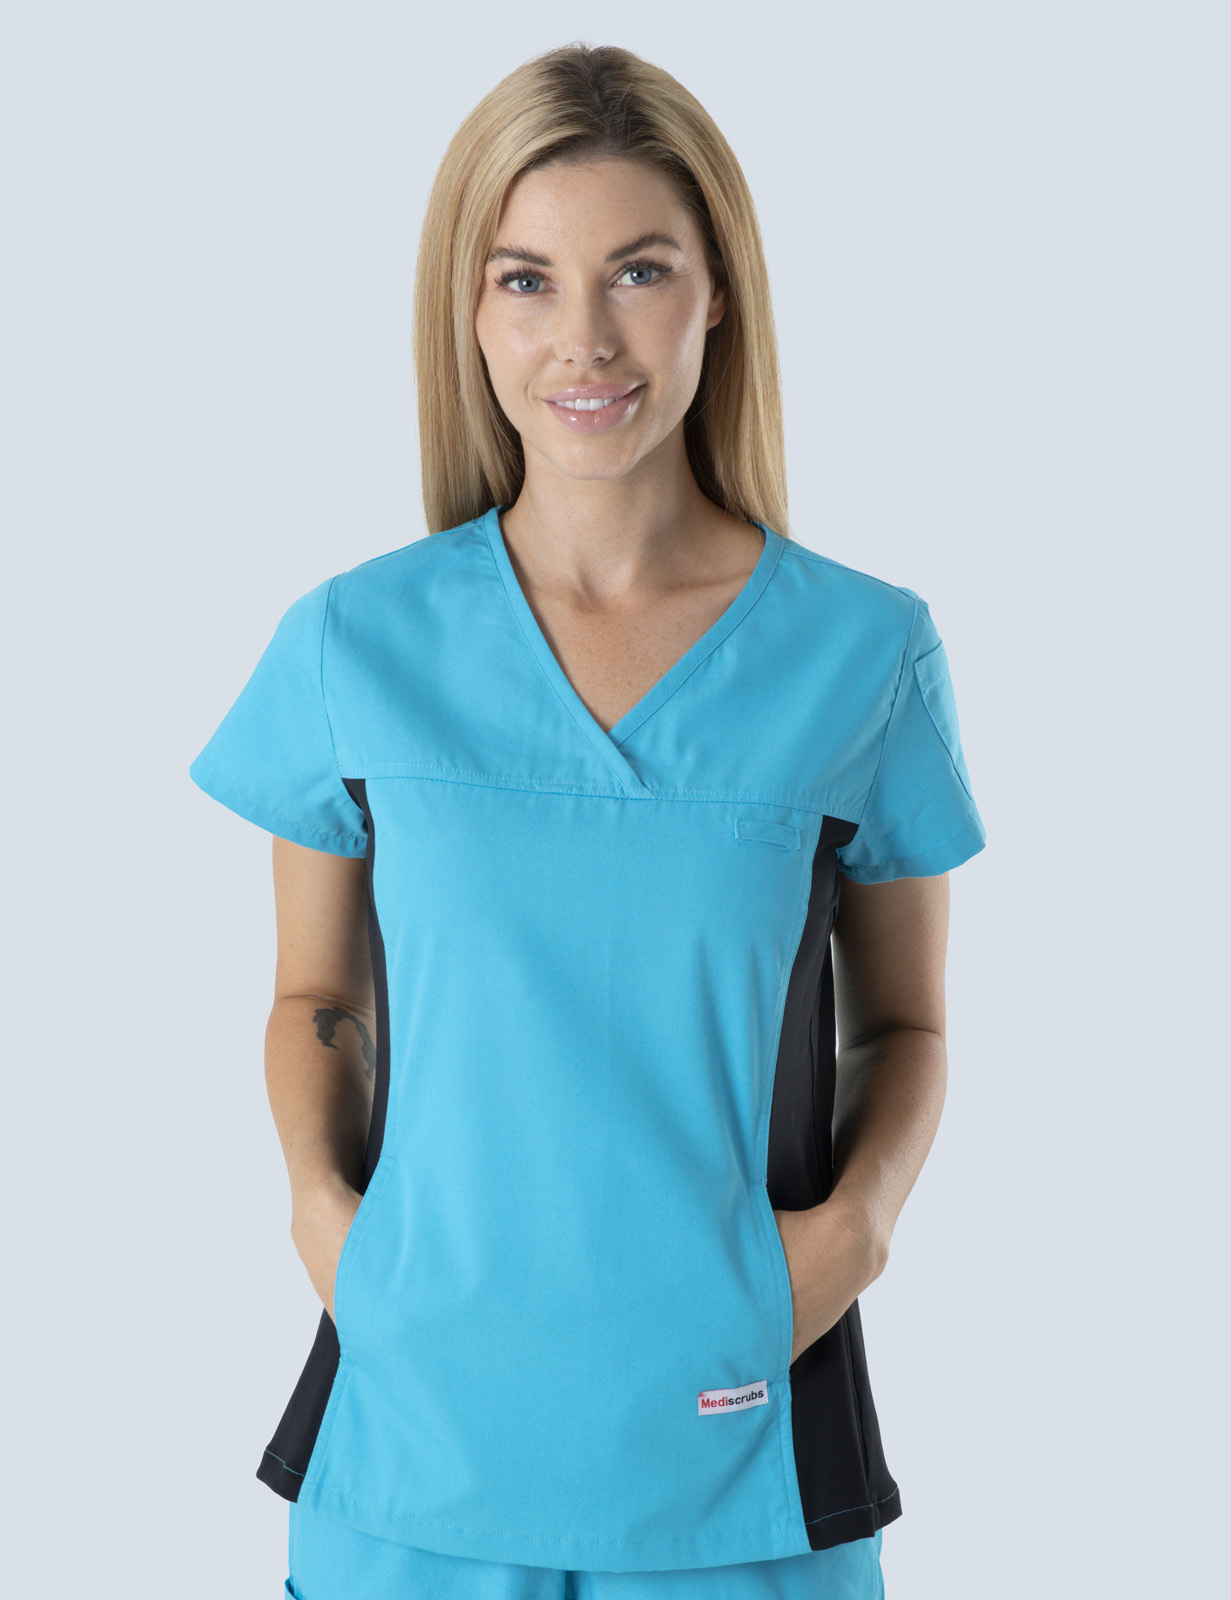 Women's Fit Solid Scrub Top With Spandex Panel - Aqua - 5X Large